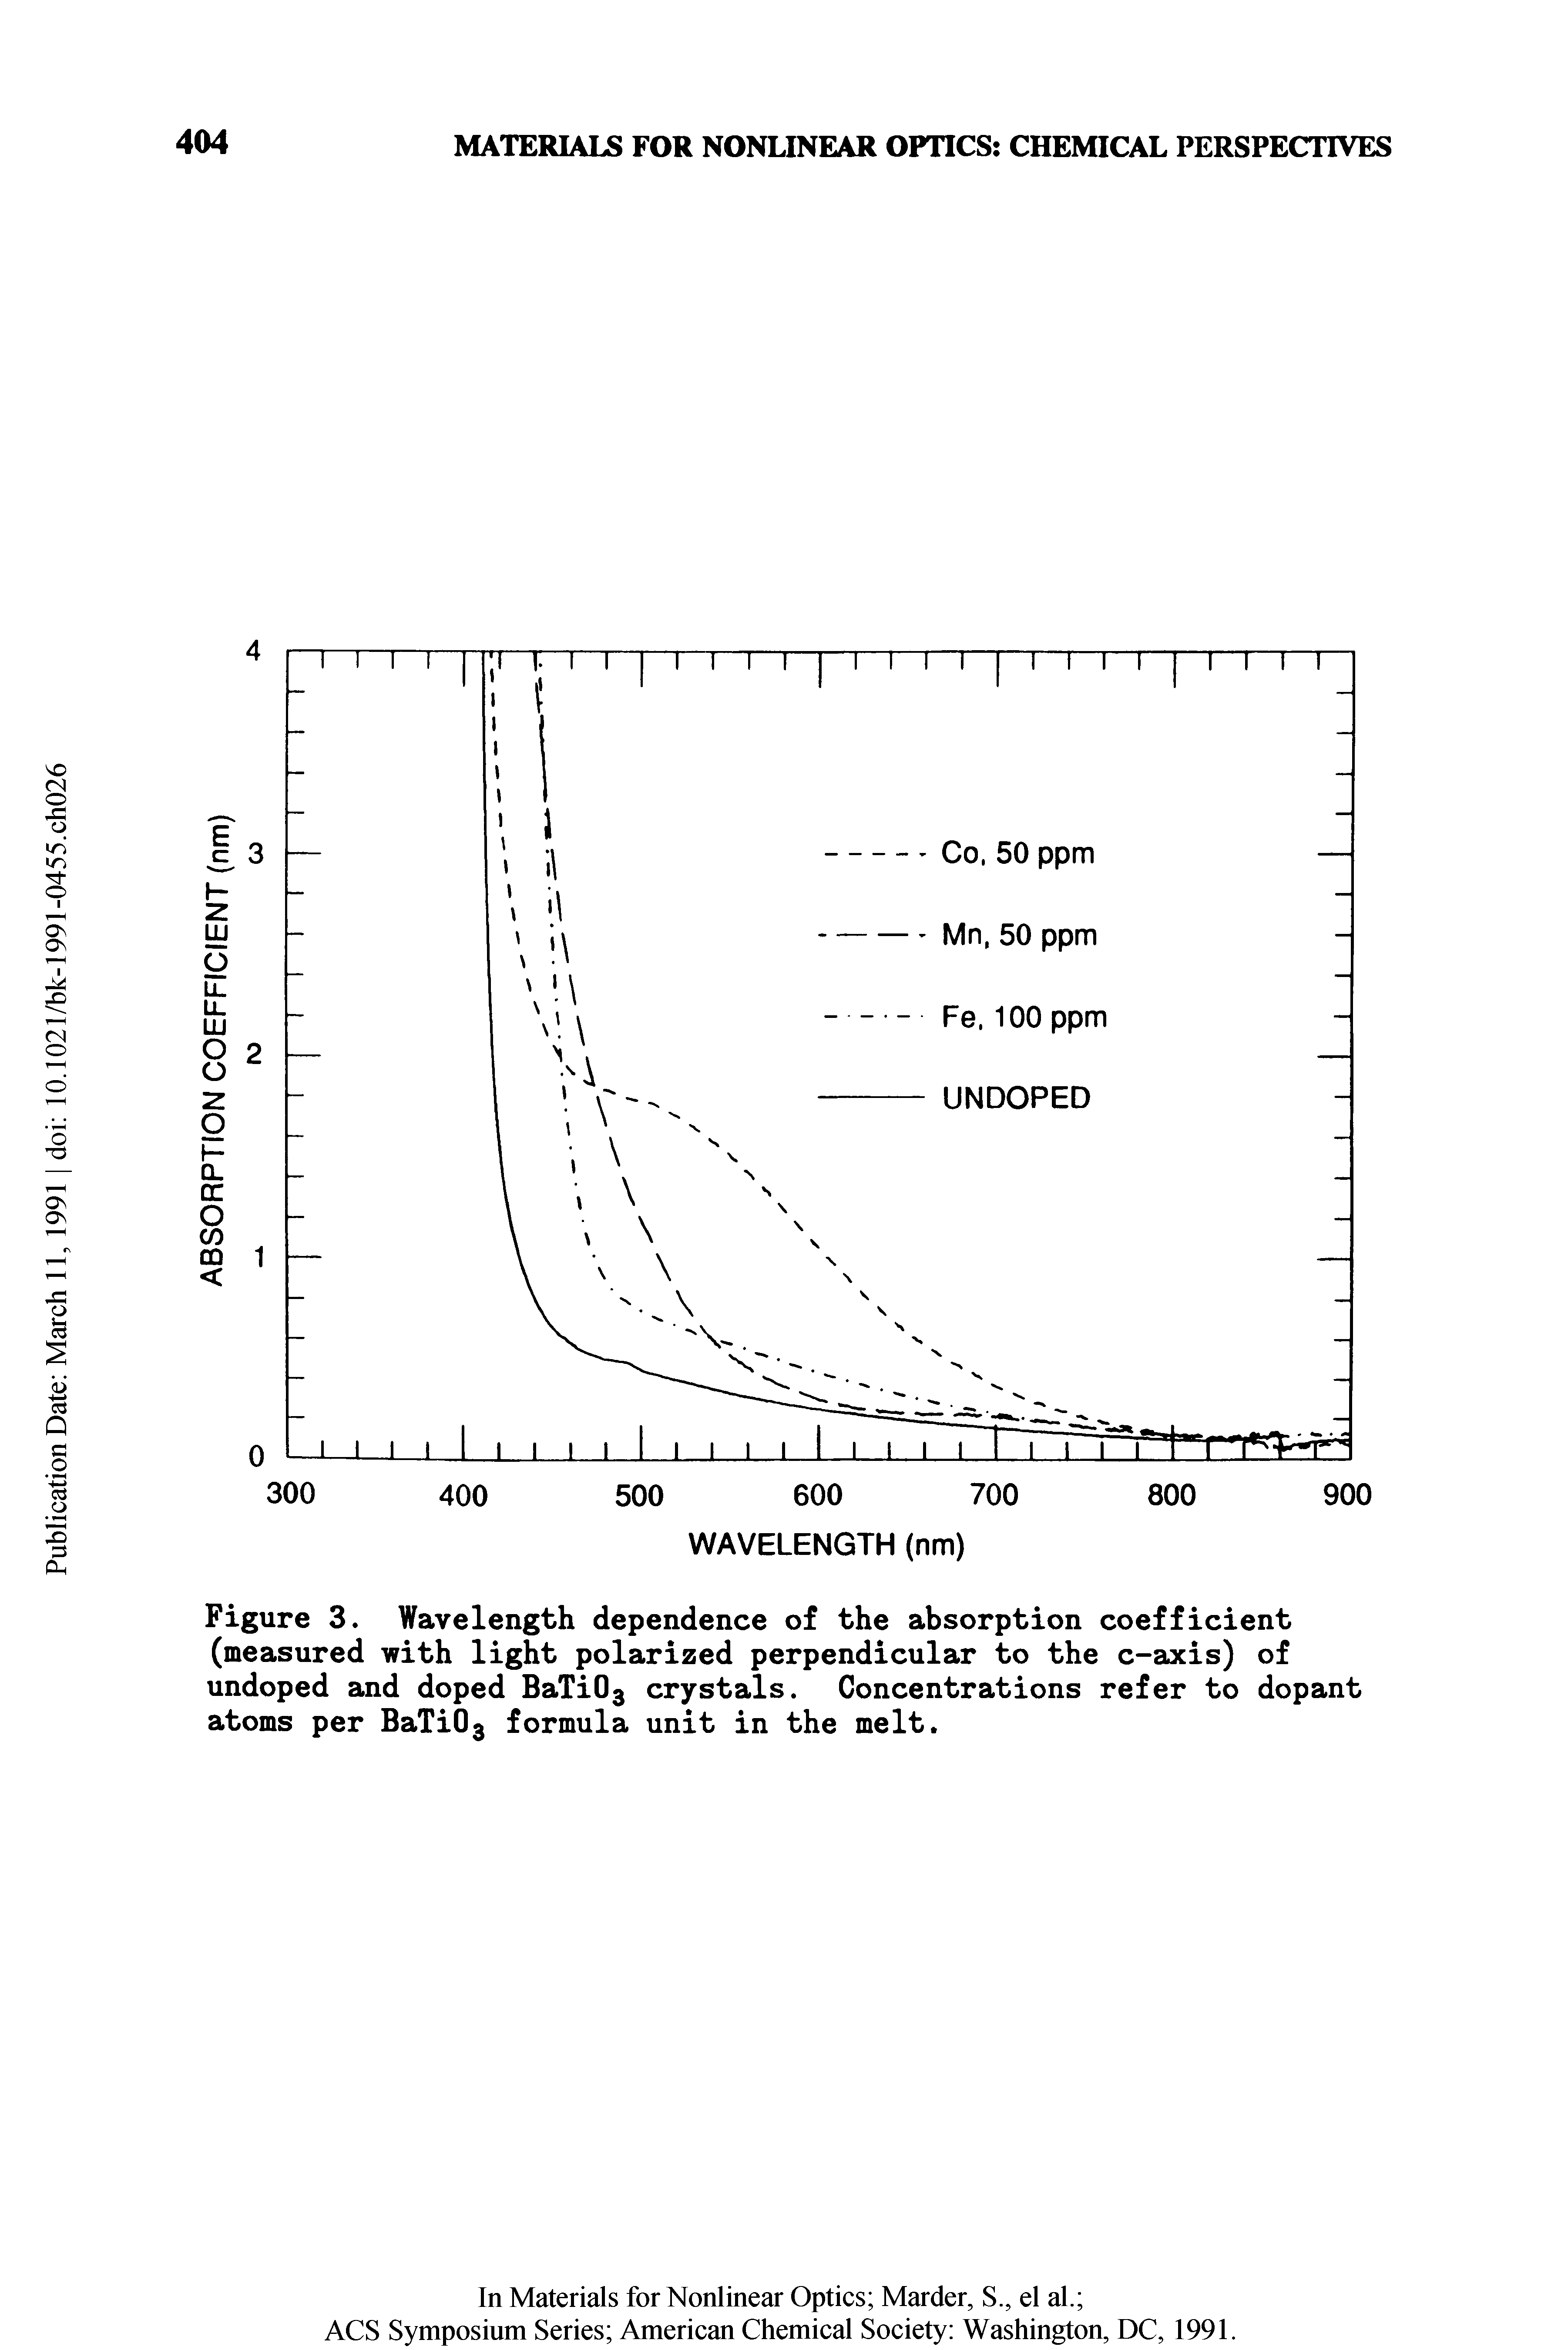 Figure 3. Wavelength dependence of the absorption coefficient (measured with light polarized perpendicular to the c-axis) of undoped and doped BaTi03 crystals. Concentrations refer to dopant atoms per BaTi03 formula unit in the melt.